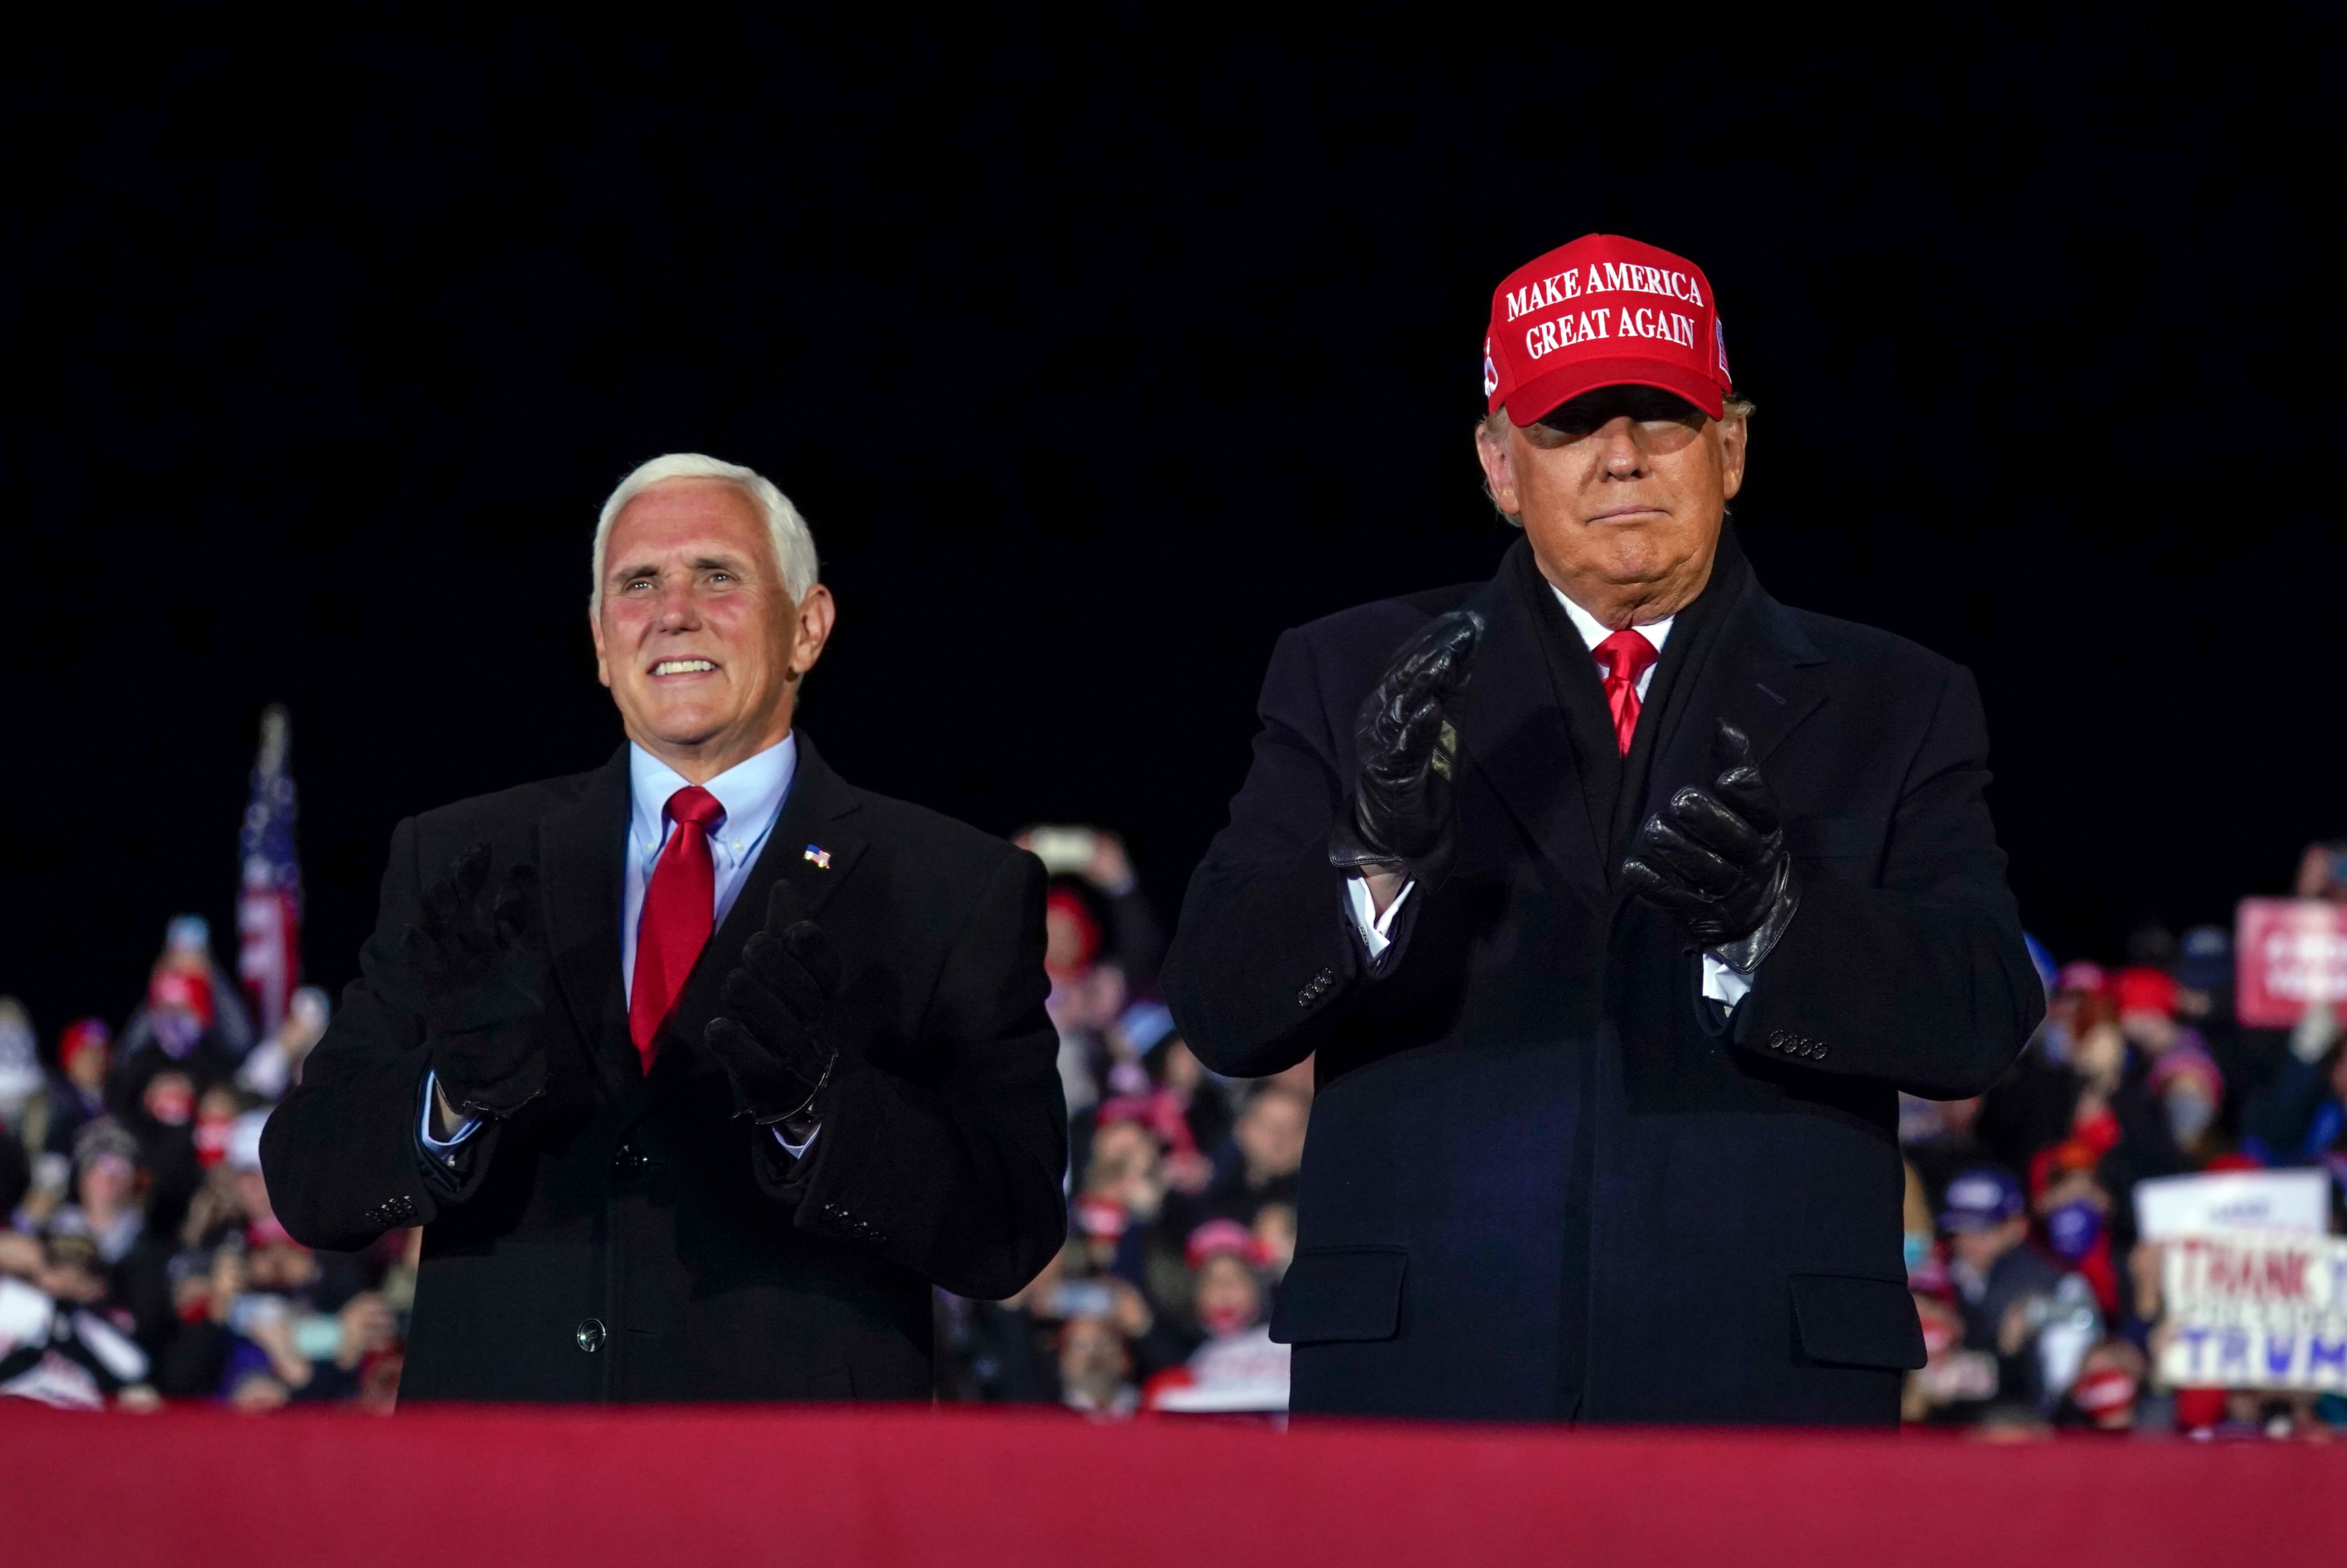 Mike Pence and Donald Trump in November 2020 – before they lost the election and their relationship soured